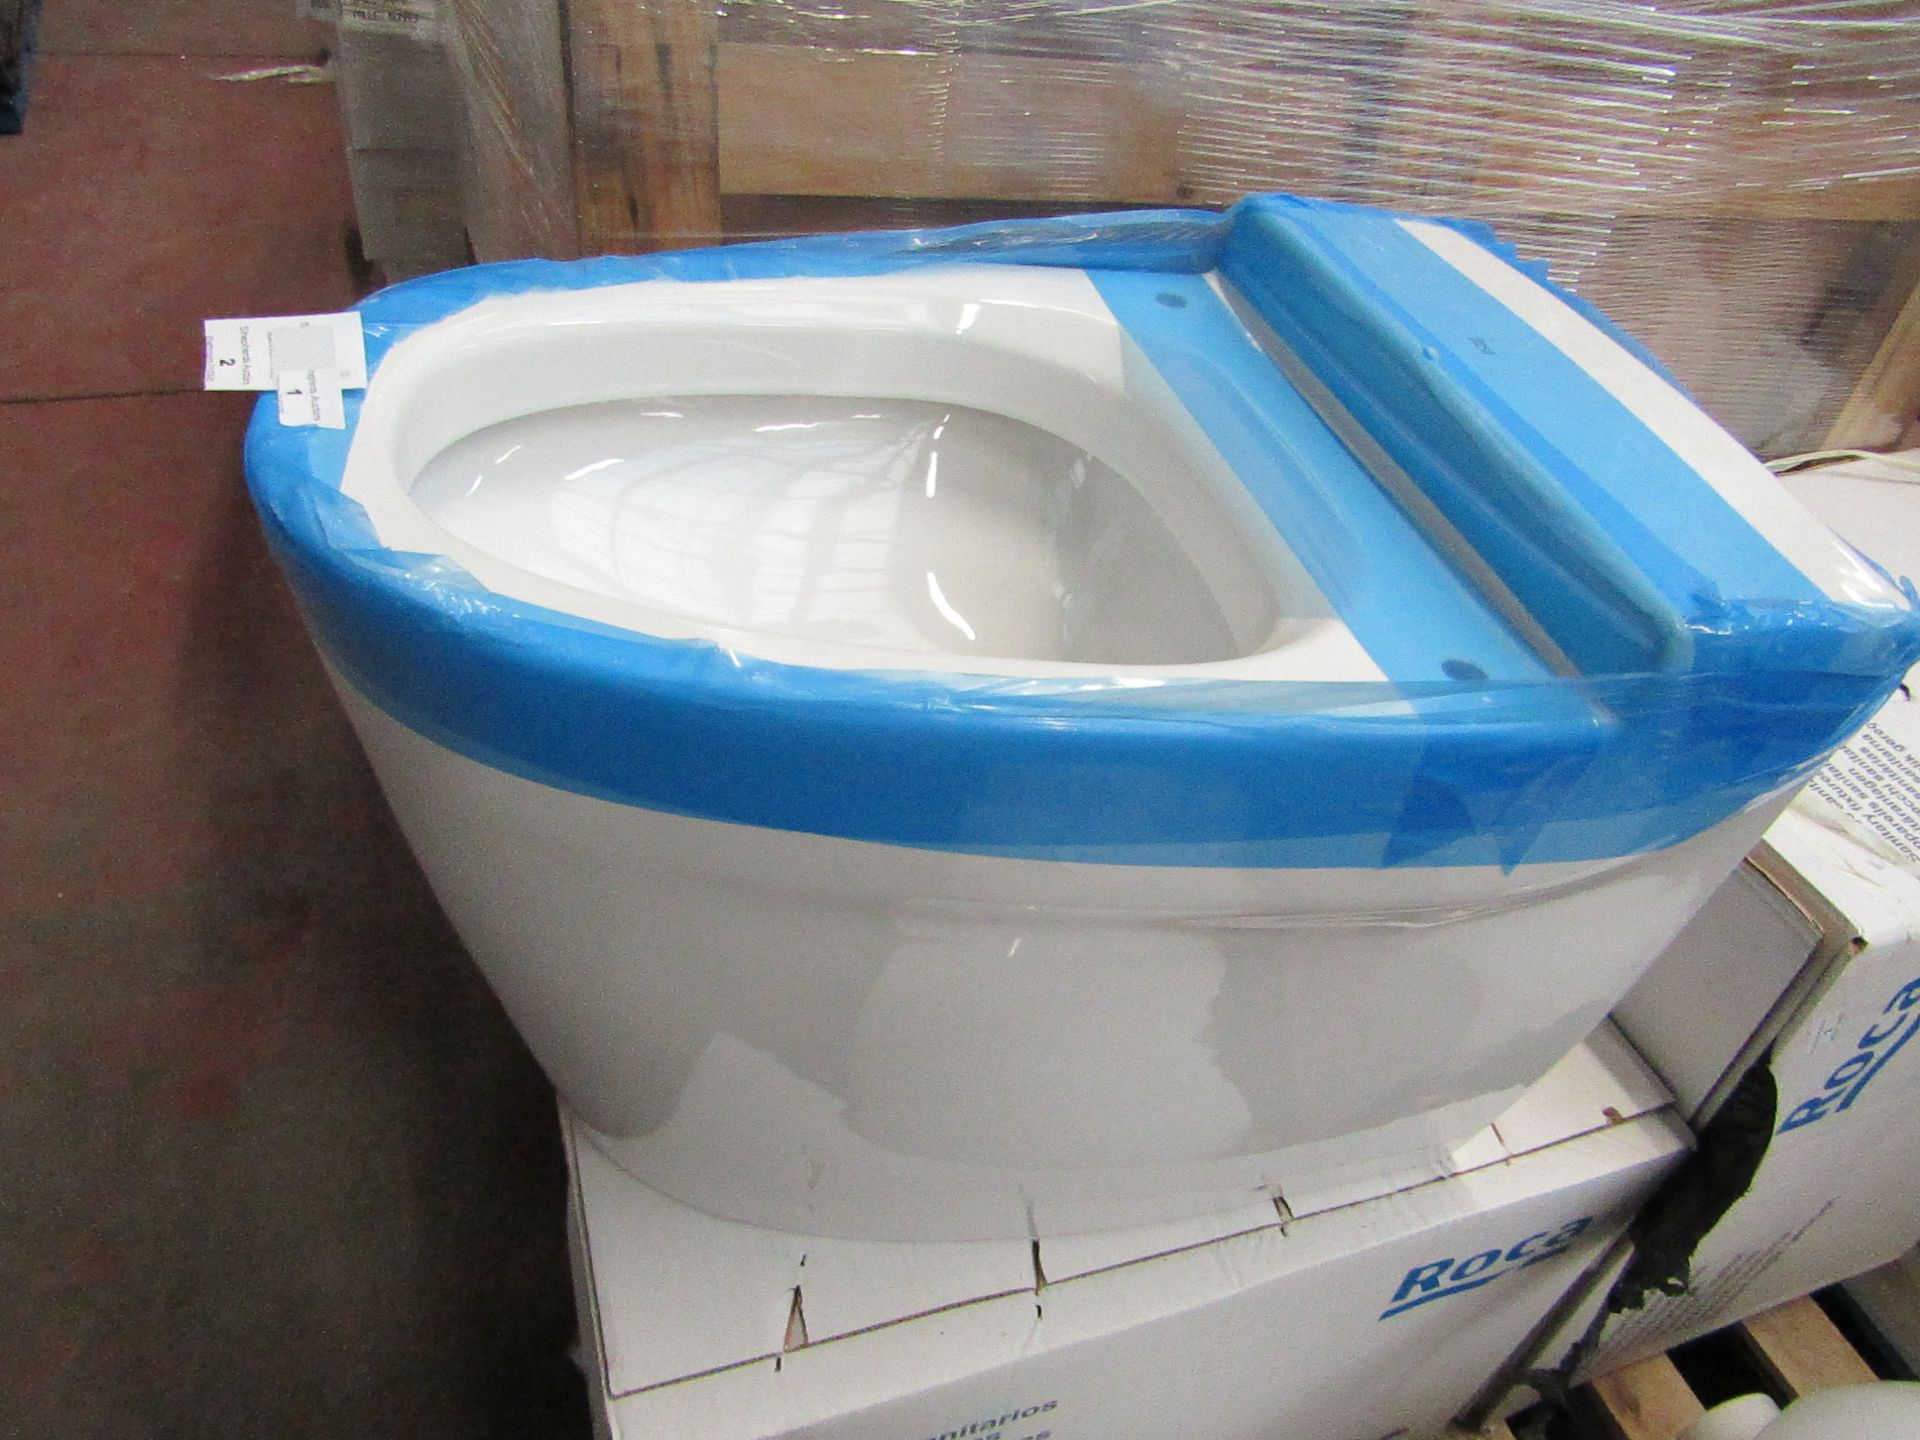 Roca Khroma toilet pan (no seat), new and boxed. RRP with seat £456.99